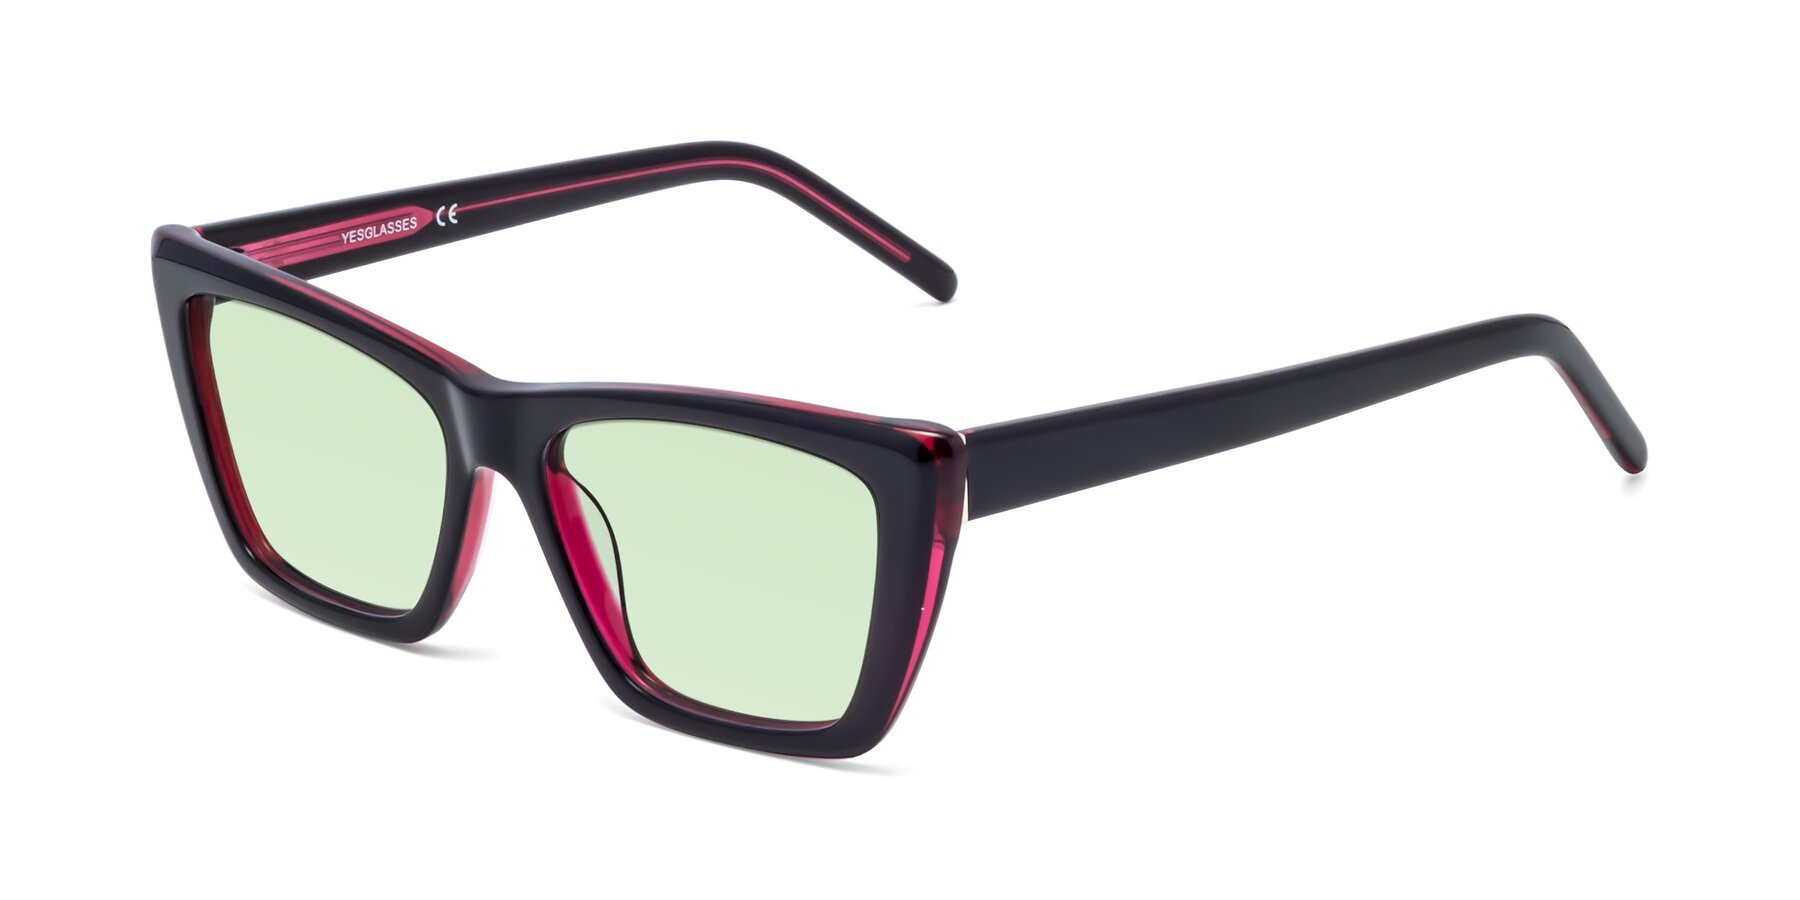 Angle of 1494 in Black-Wine with Light Green Tinted Lenses